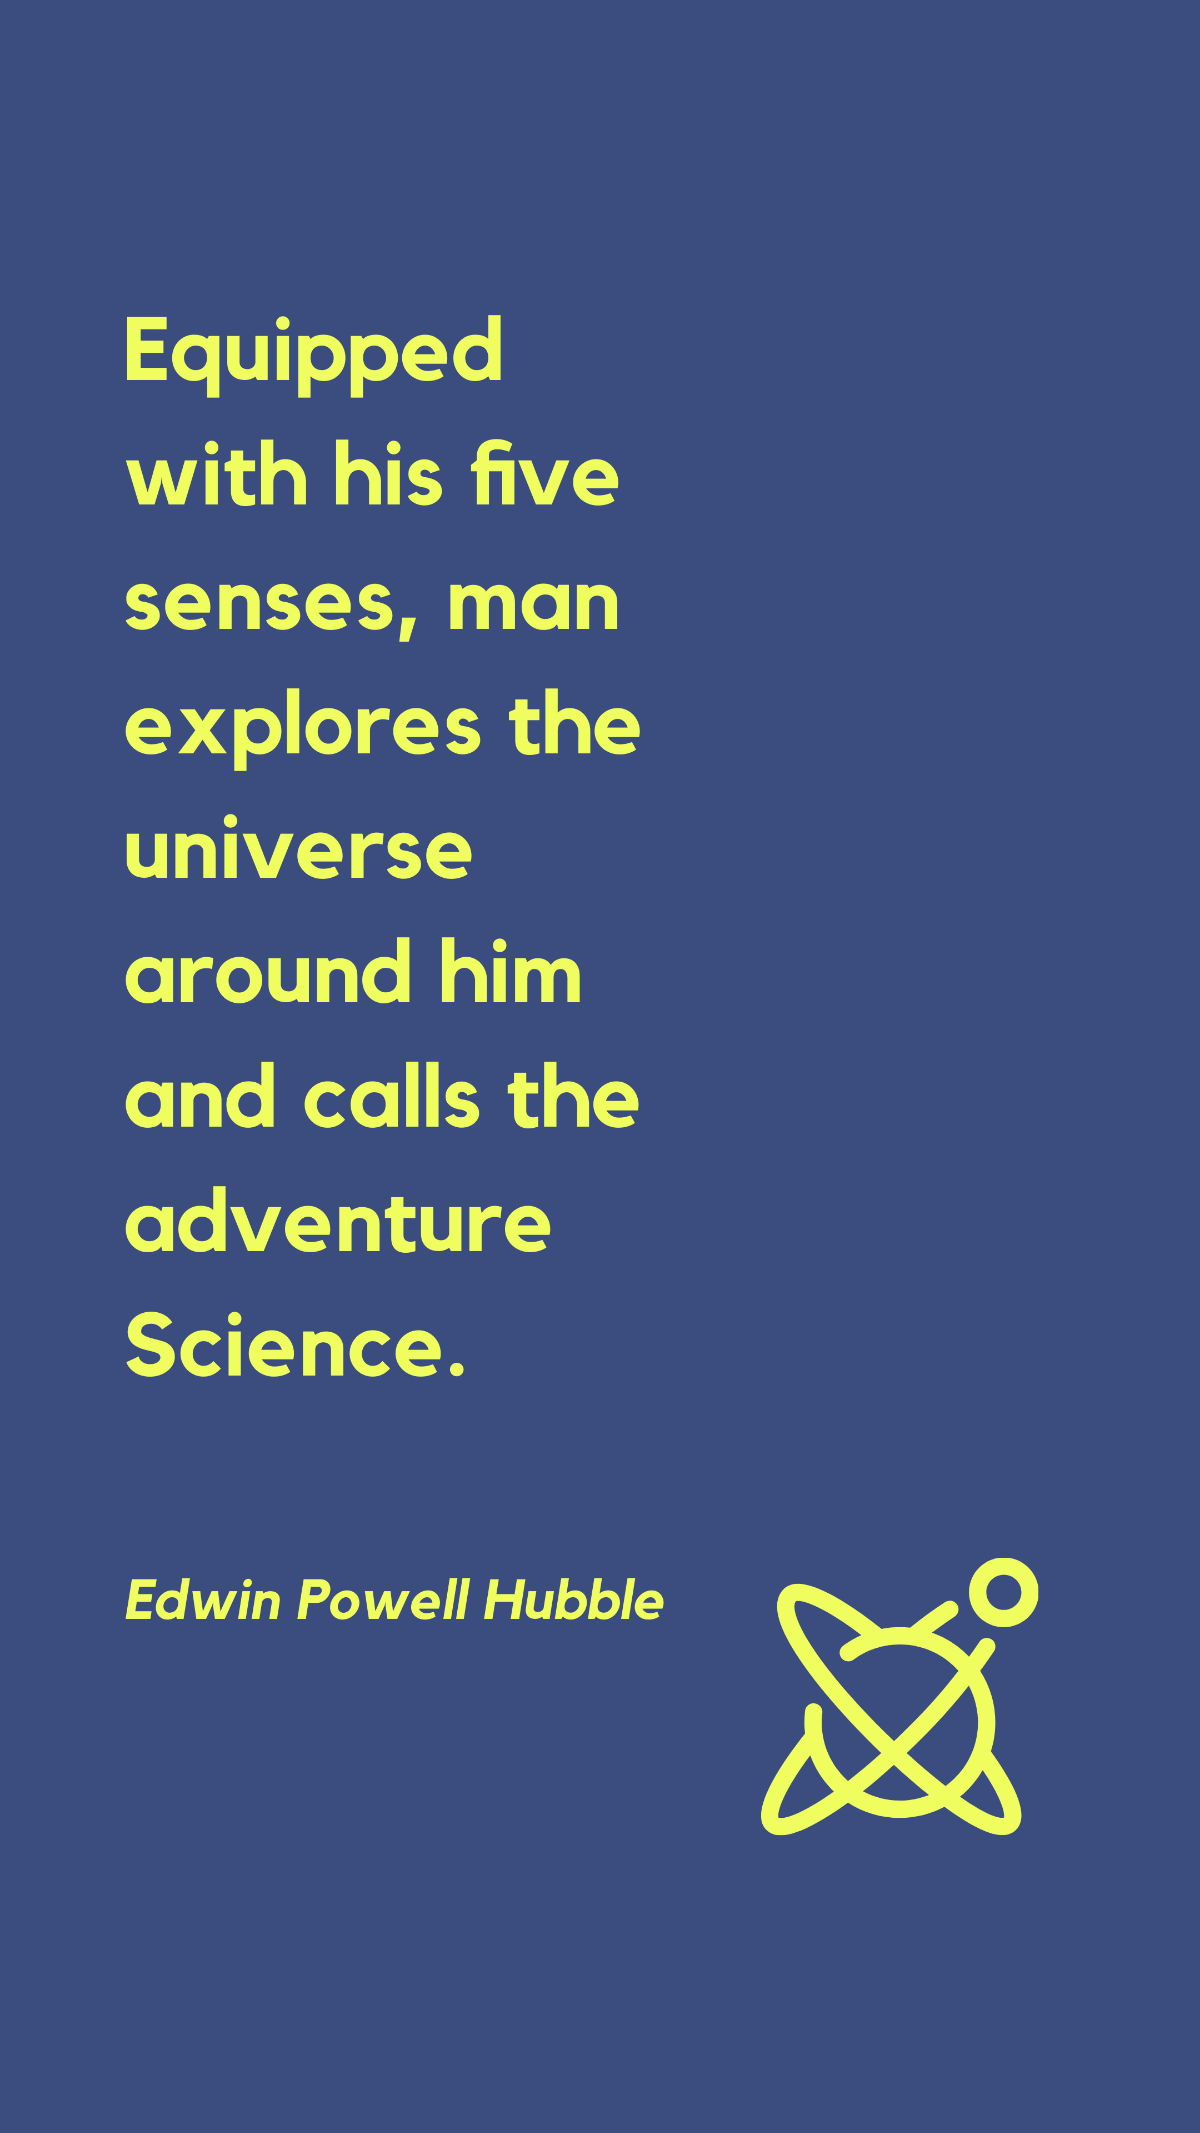 Free Edwin Powell Hubble - Equipped with his five senses, man explores the universe around him and calls the adventure Science. Template